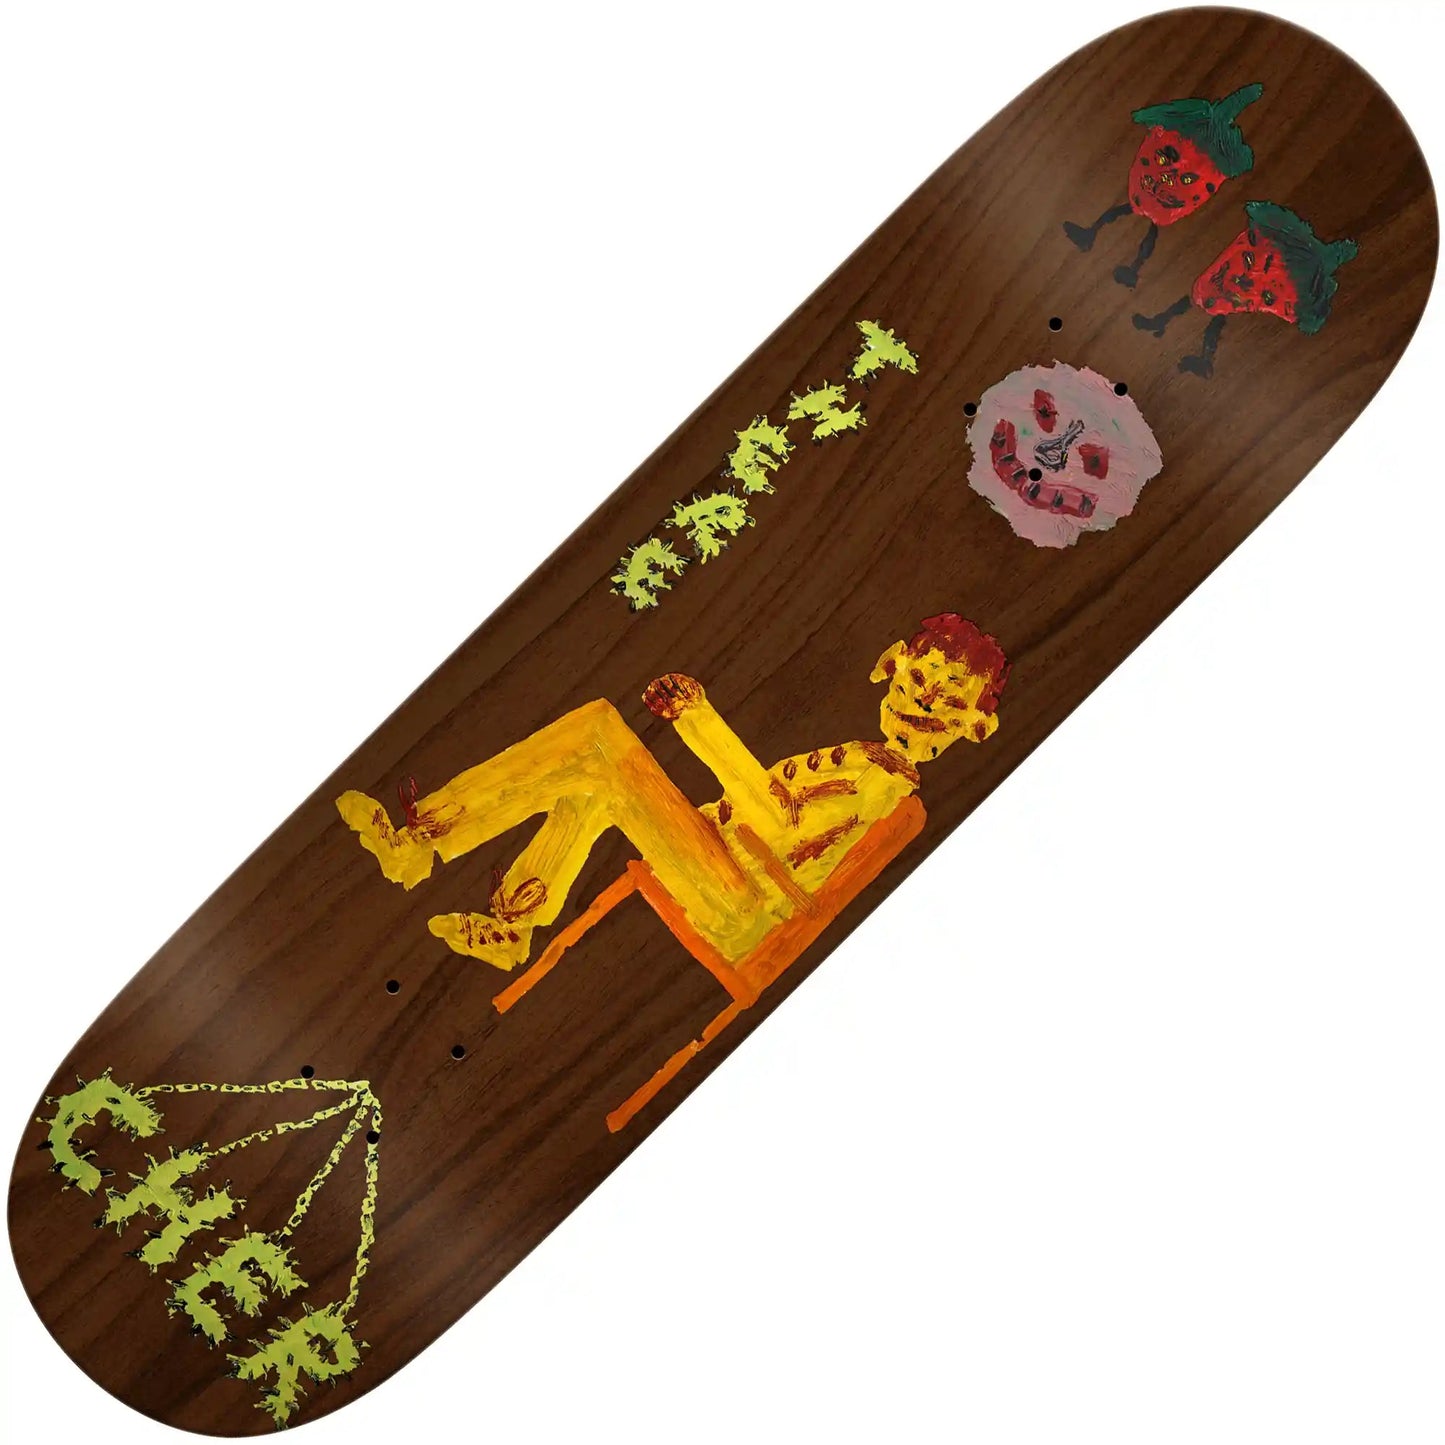 There Cher Get Off My Case True Fit (8.25"), brown - Tiki Room Skateboards - 1